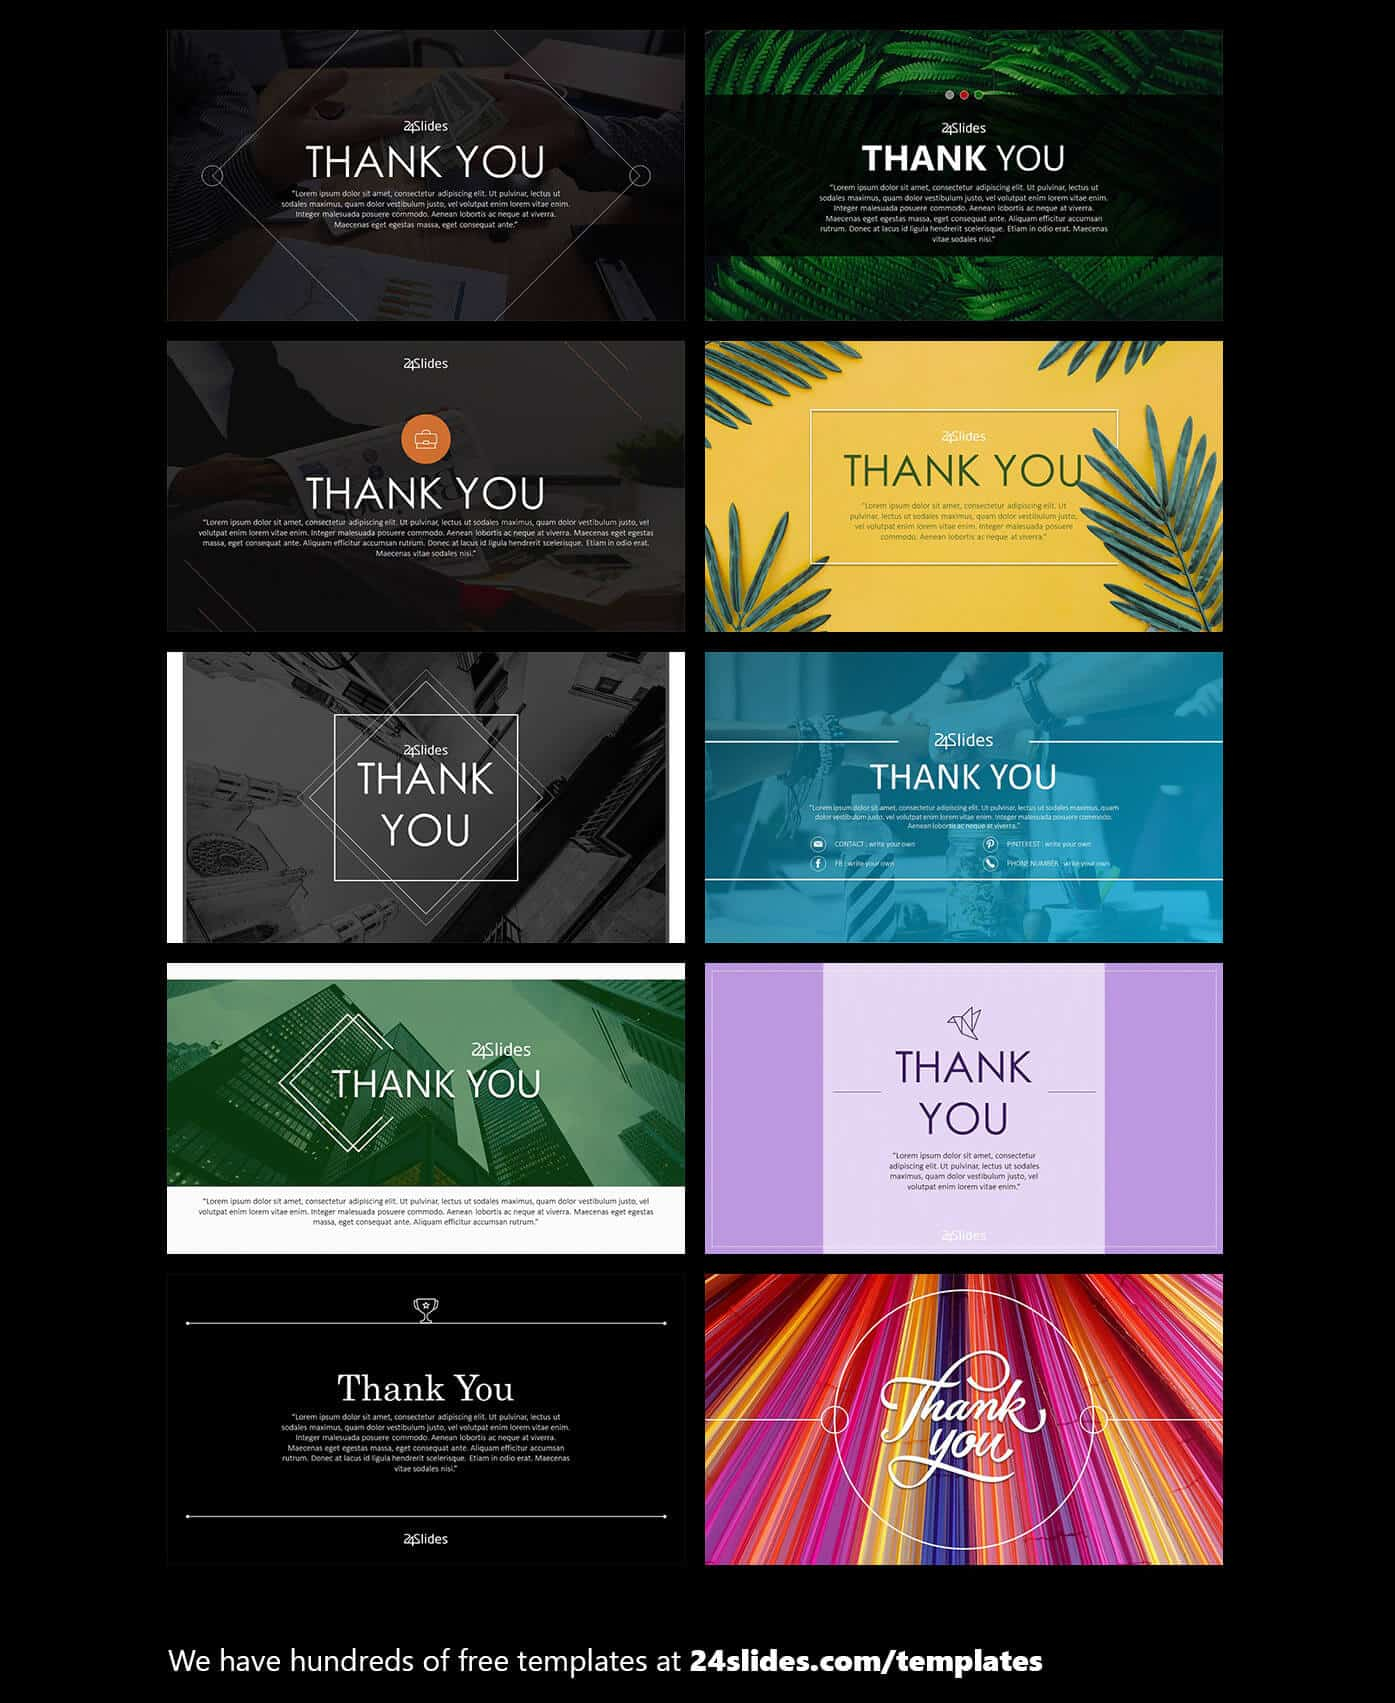 15 Fun And Colorful Free Powerpoint Templates | Present Better Inside Fun Powerpoint Templates Free Download